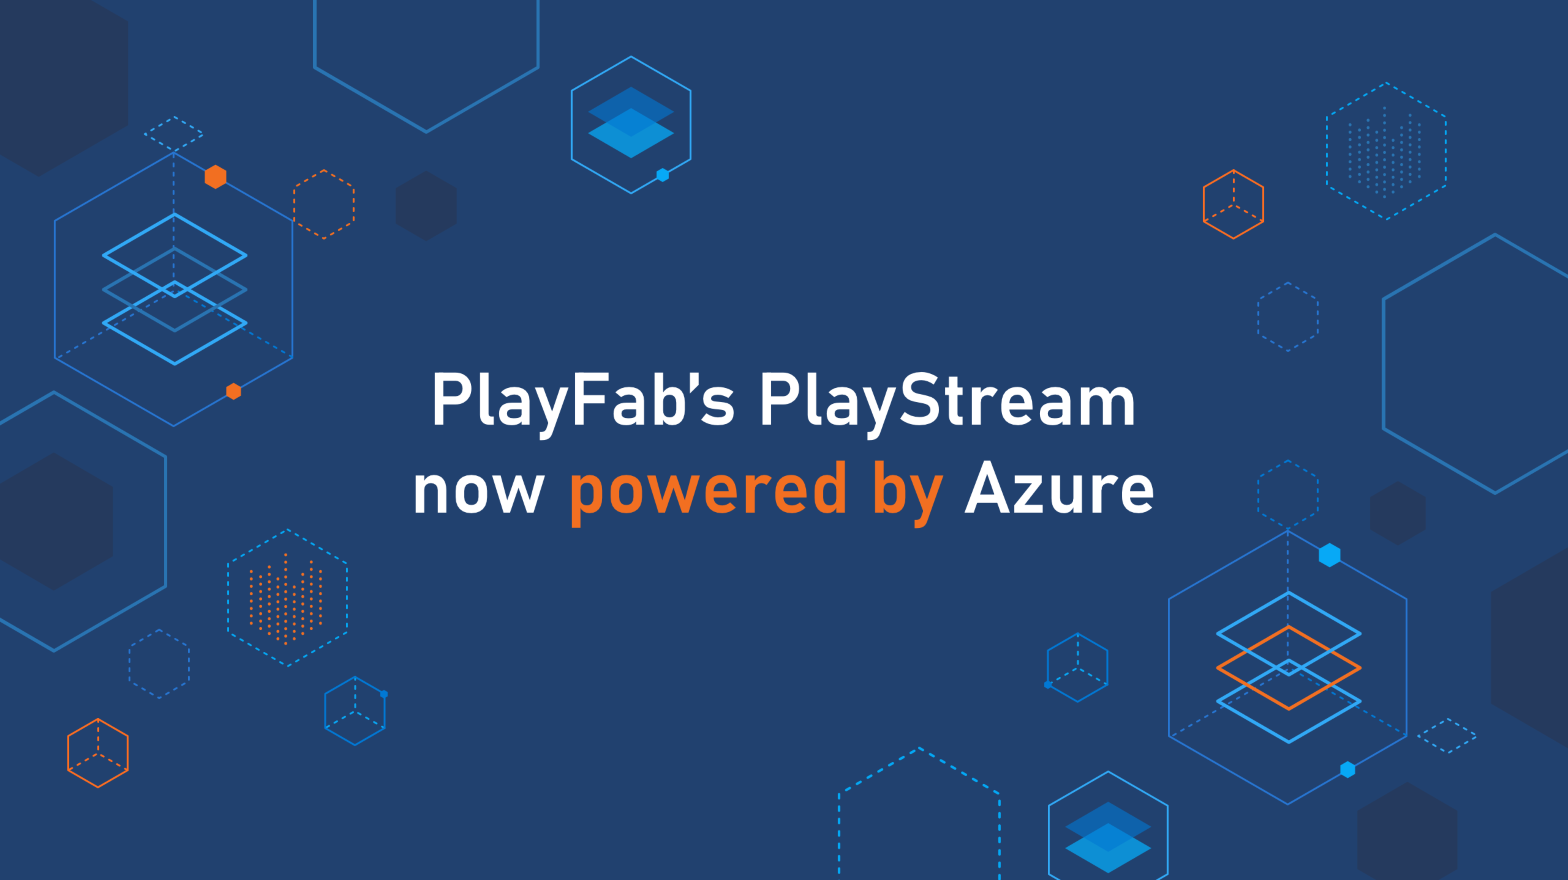 PlayFab’s PlayStream now powered by Azure